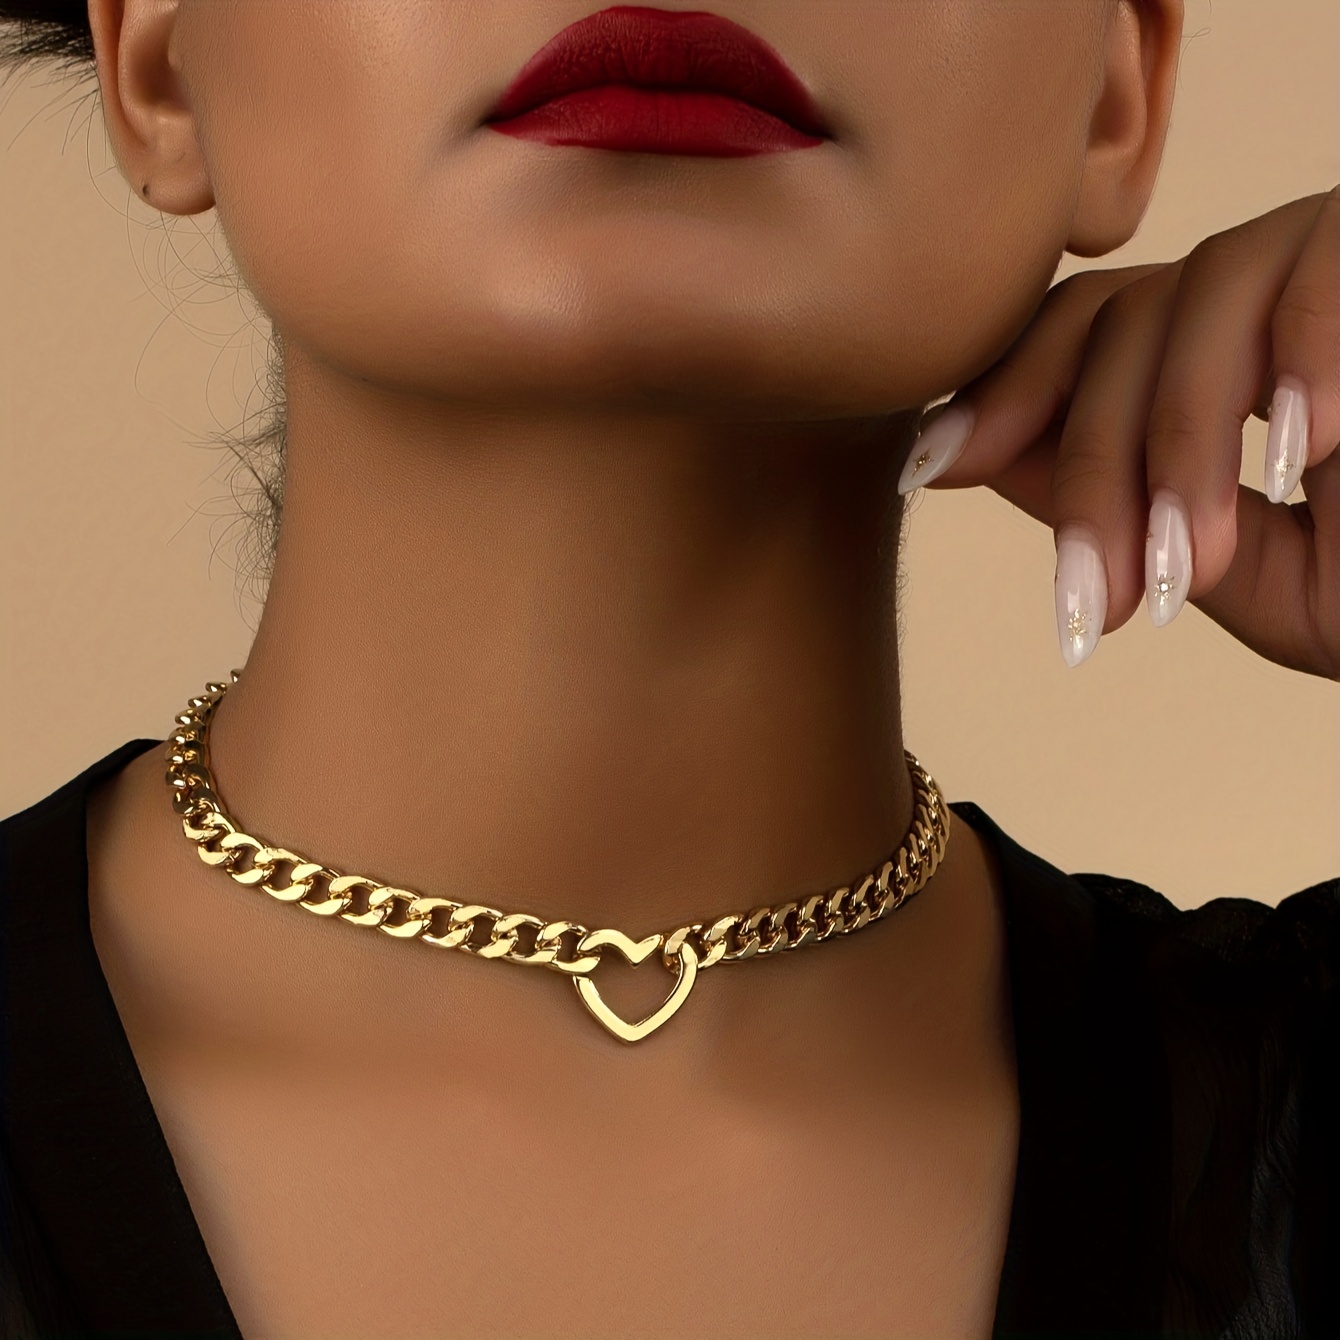 Cuban Link Chain Necklace Lady Hearts, Charm Choker Necklace